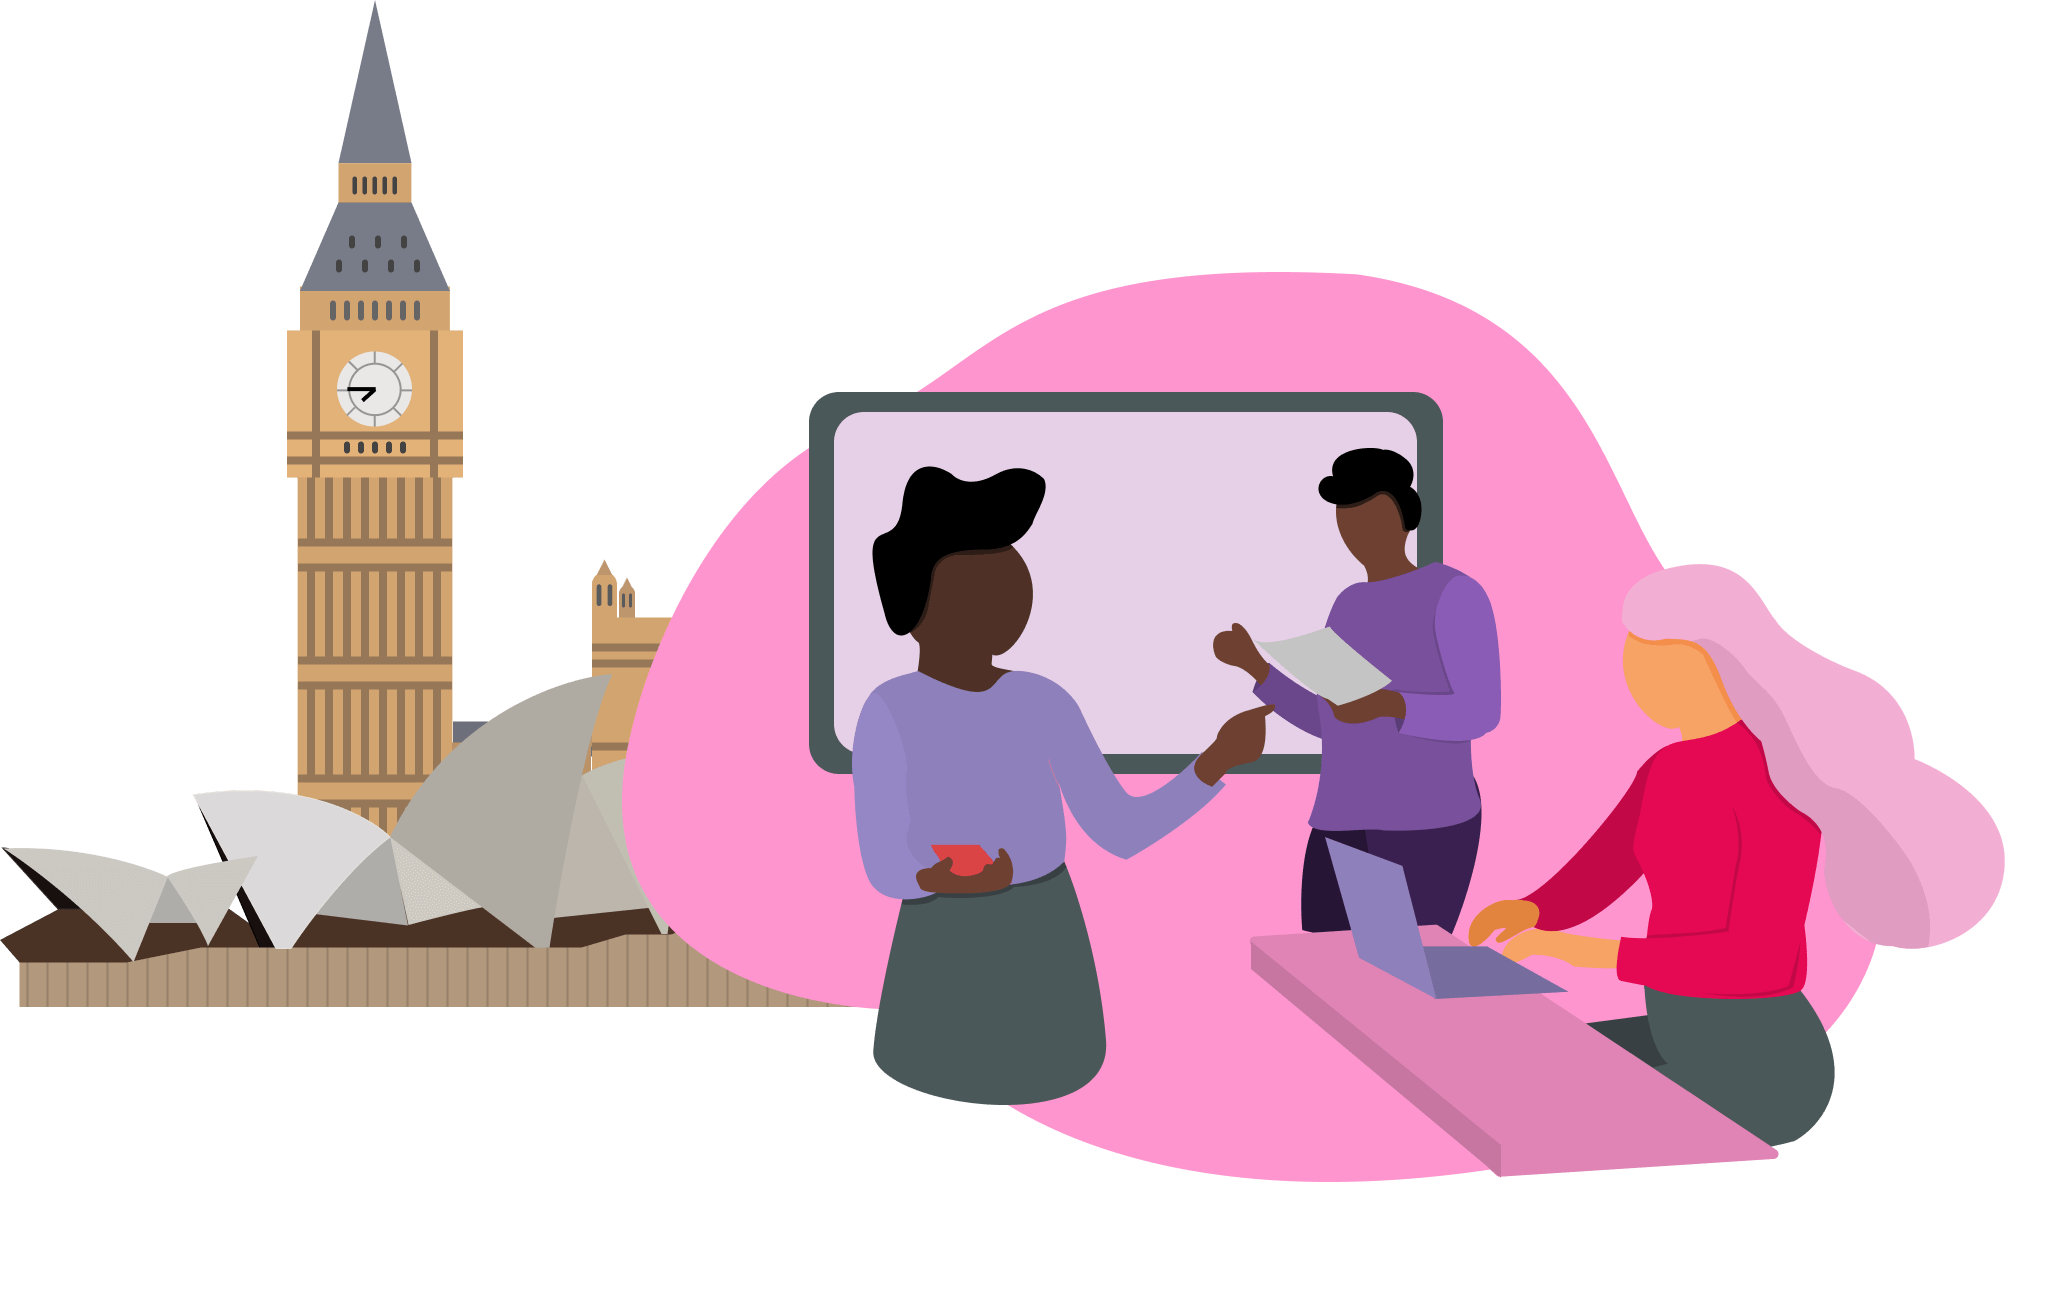 Illustration of staff and students working together around their computers with the Palace of Westminster and the Sydney Opera House in the background